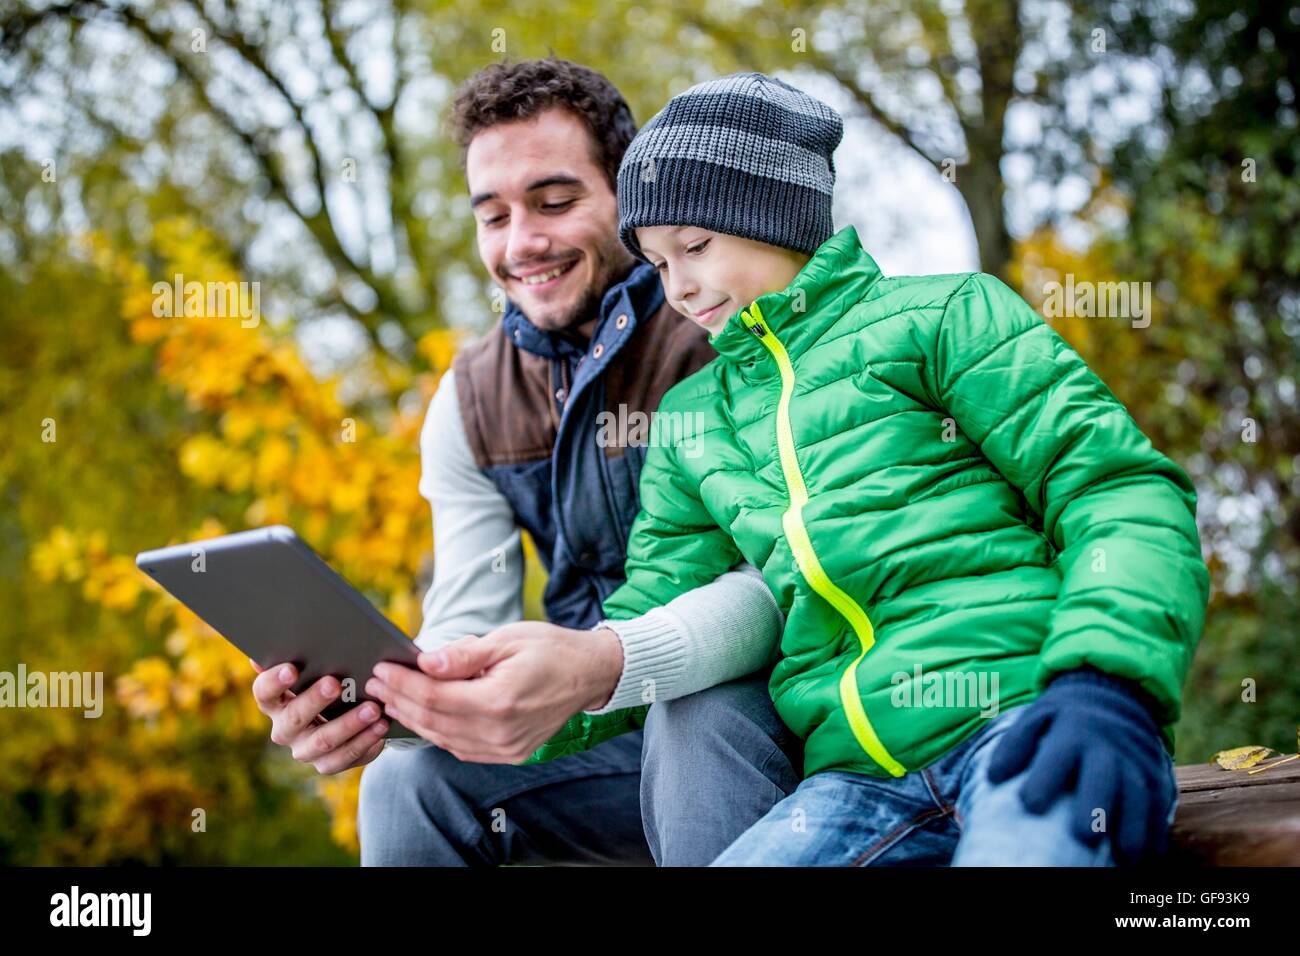 MODEL RELEASED. Father and son using digital tablet in autumn. Stock Photo